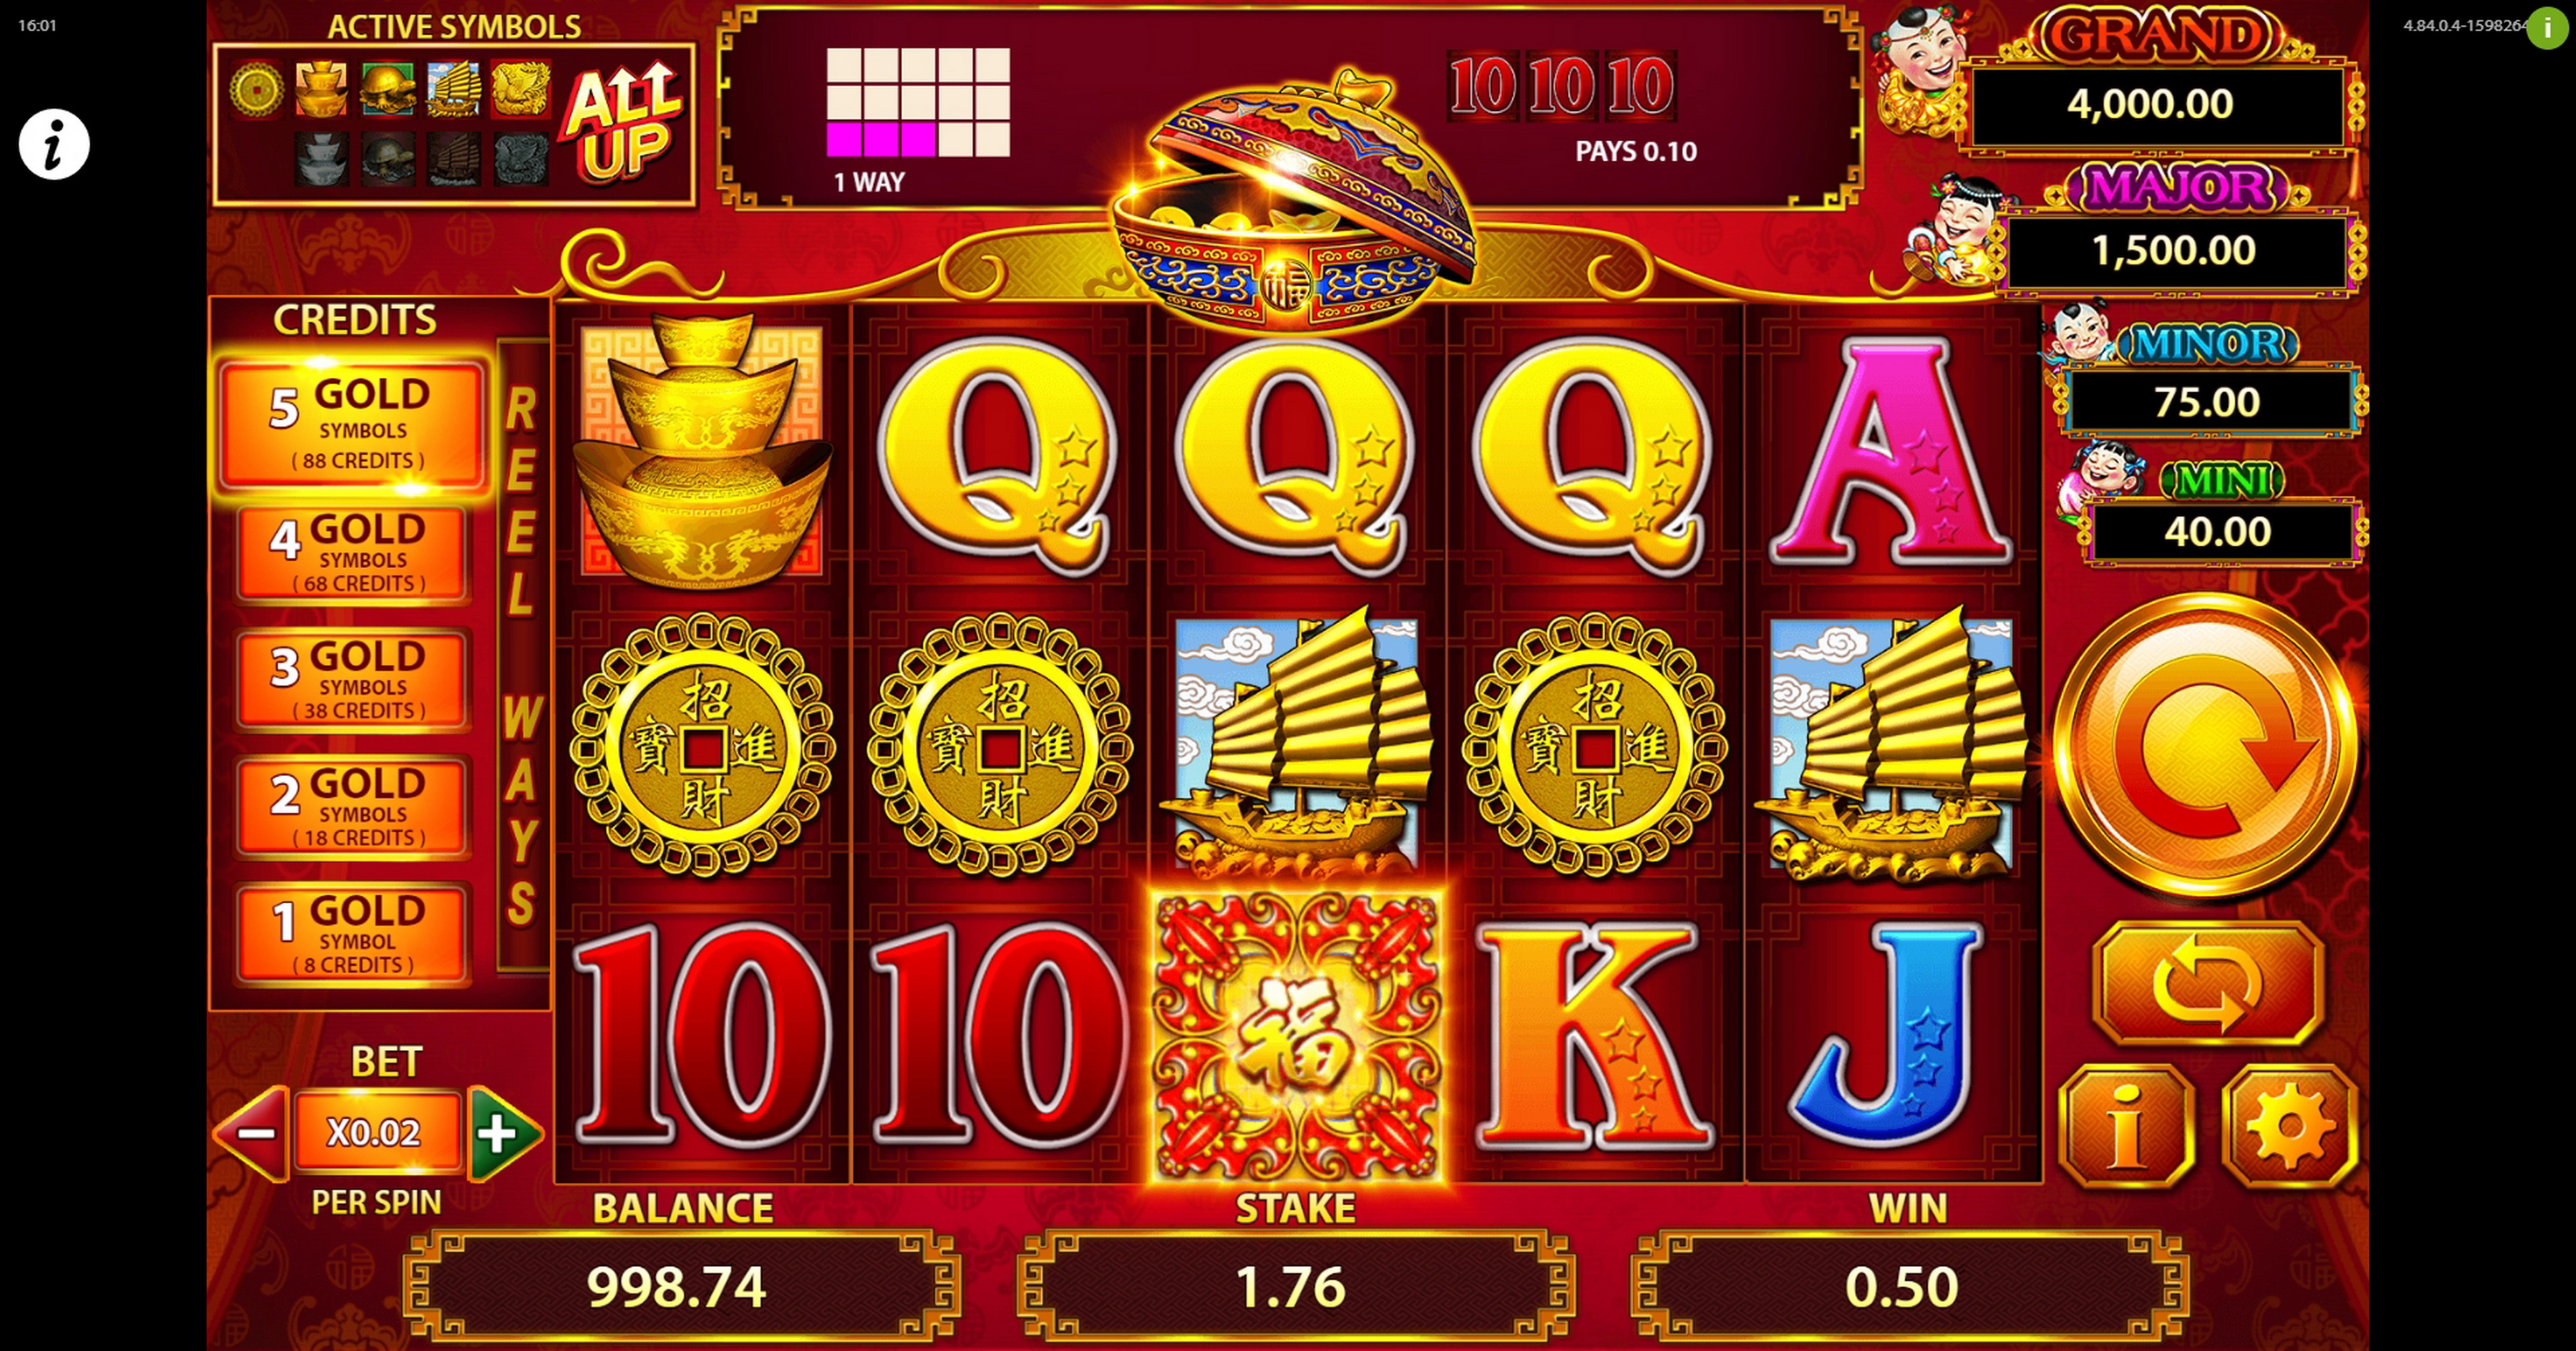 88 Fortunes demo play Slot Machine Online by SG Review